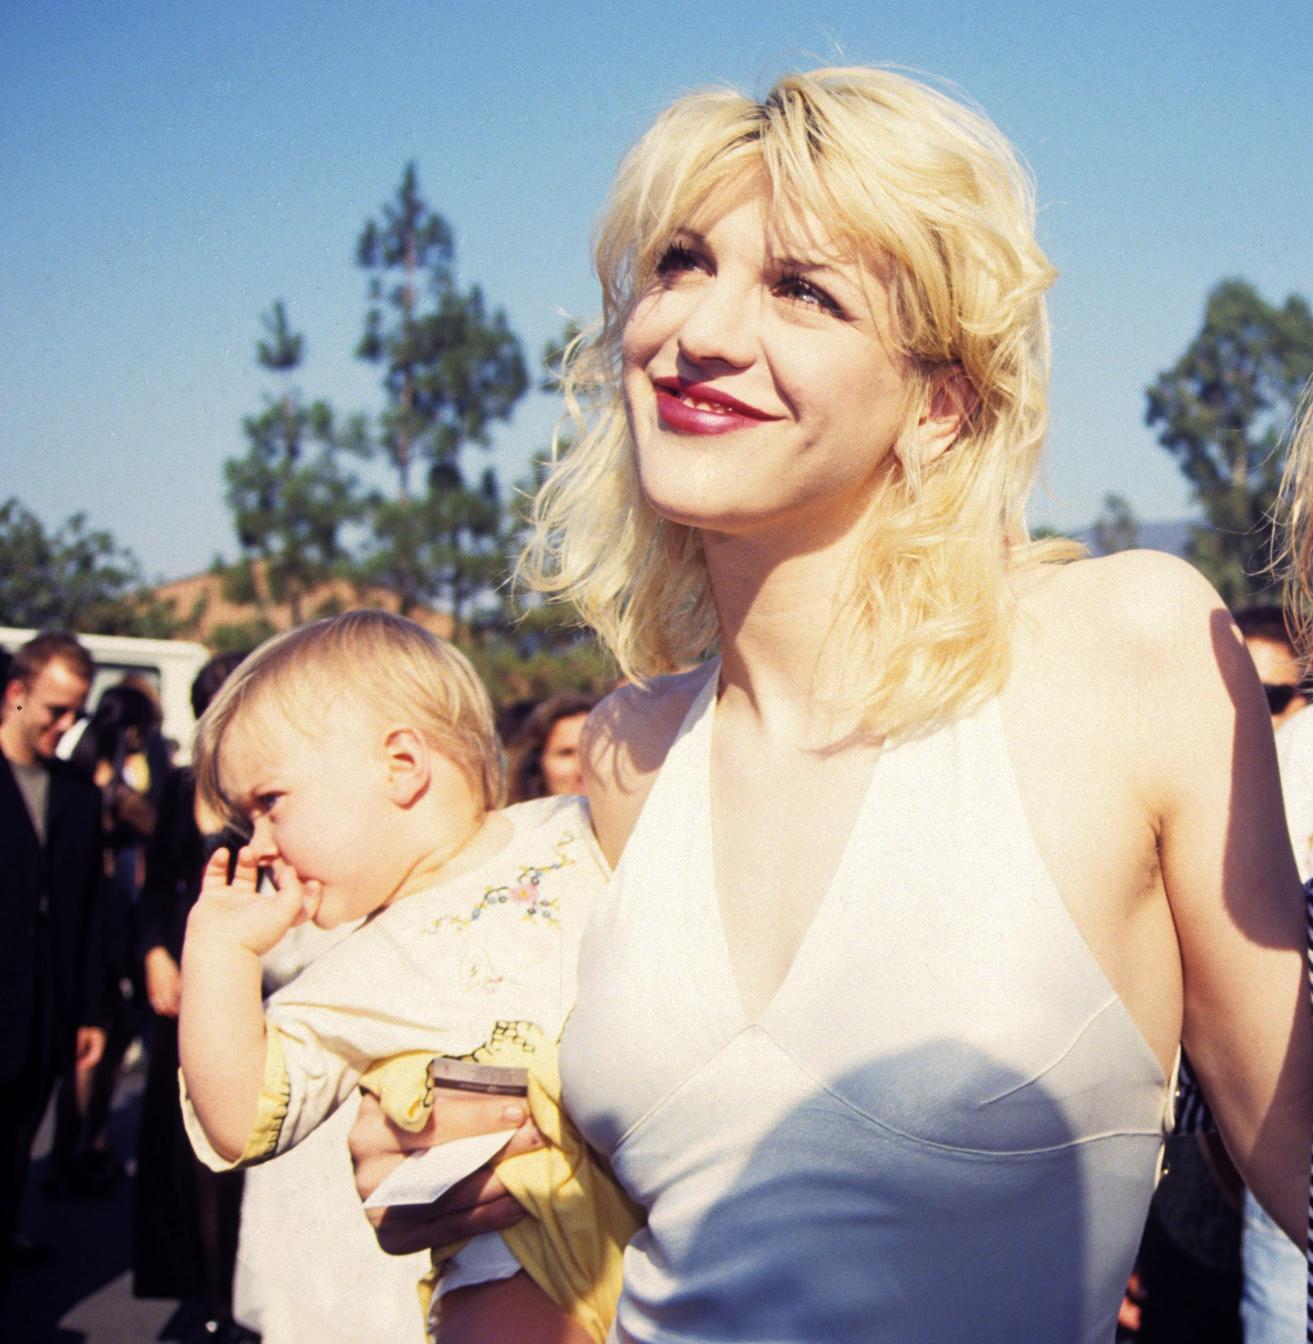 Happy birthday Courtney Love! Cheers to an inspiring woman.
--> 

© Getty Images 